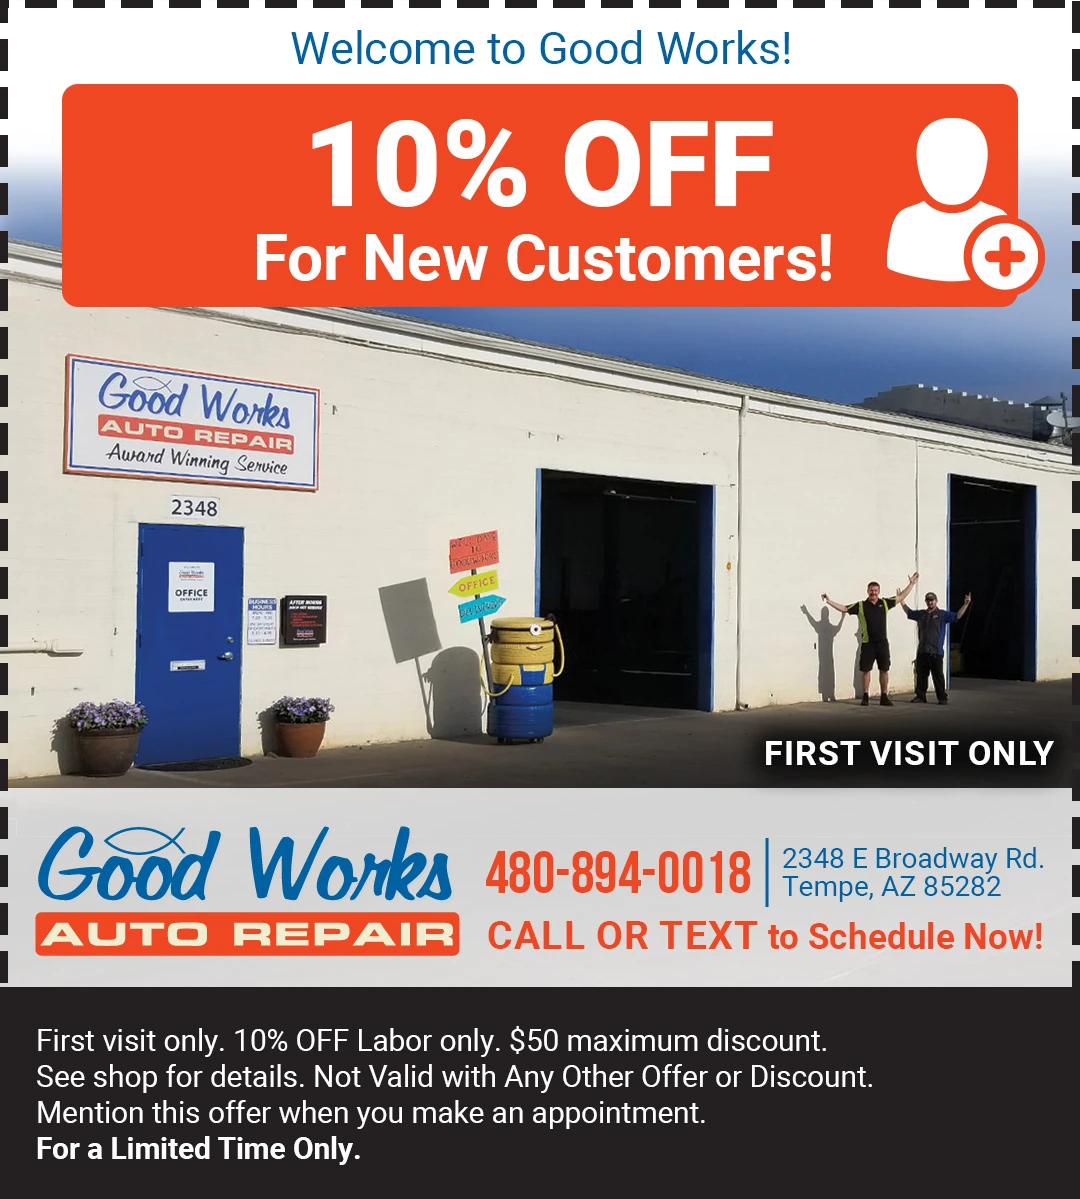 10 percent off brake service for new customers